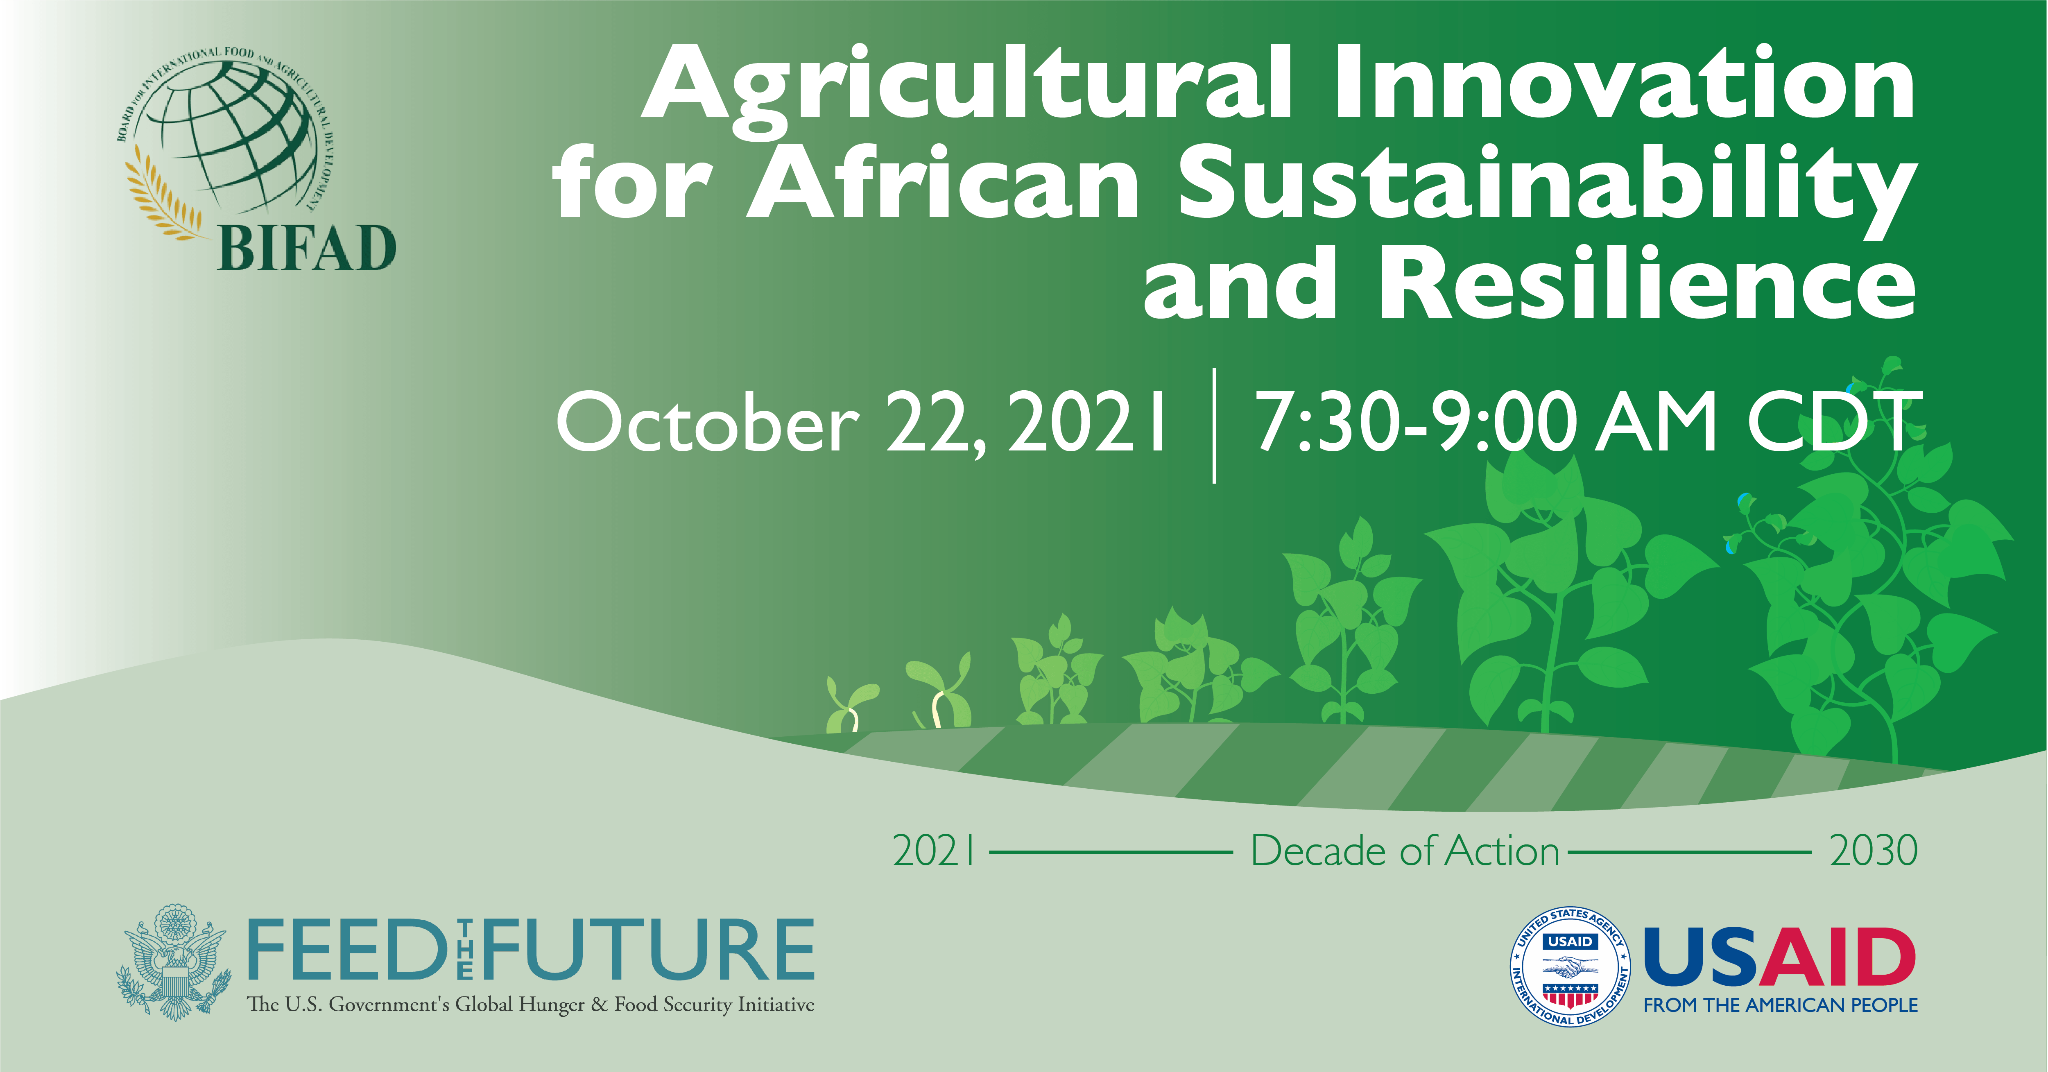 Agricultural Innovation for African Sustainability and Resilience. October 22, 2021, 7:30 - 9:00 am CDT